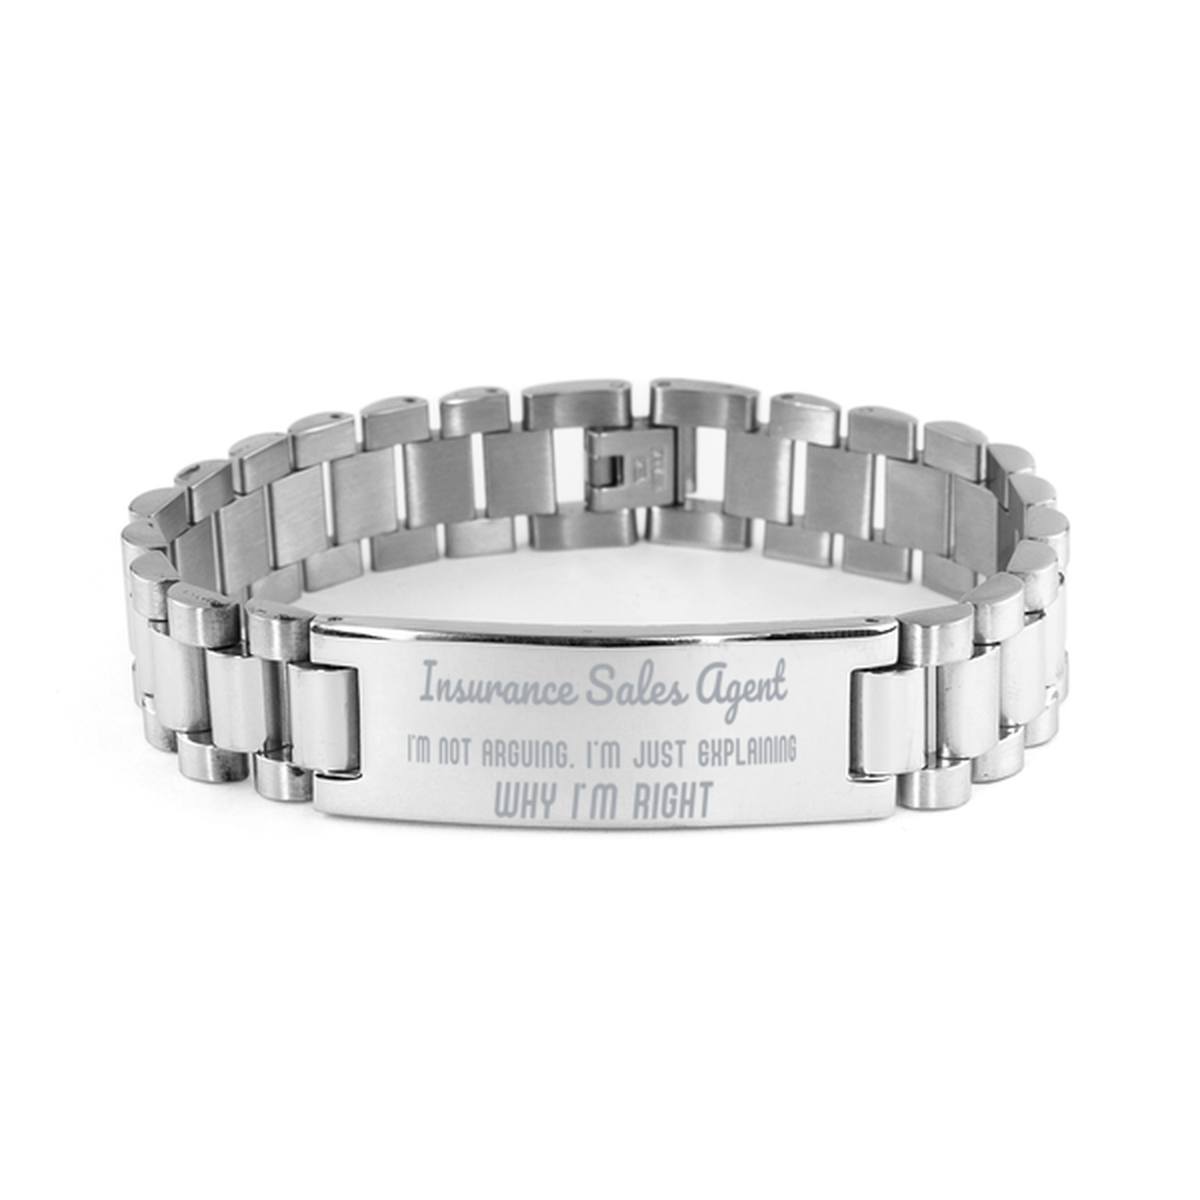 Insurance Sales Agent I'm not Arguing. I'm Just Explaining Why I'm RIGHT Ladder Stainless Steel Bracelet, Graduation Birthday Christmas Insurance Sales Agent Gifts For Insurance Sales Agent Funny Saying Quote Present for Men Women Coworker